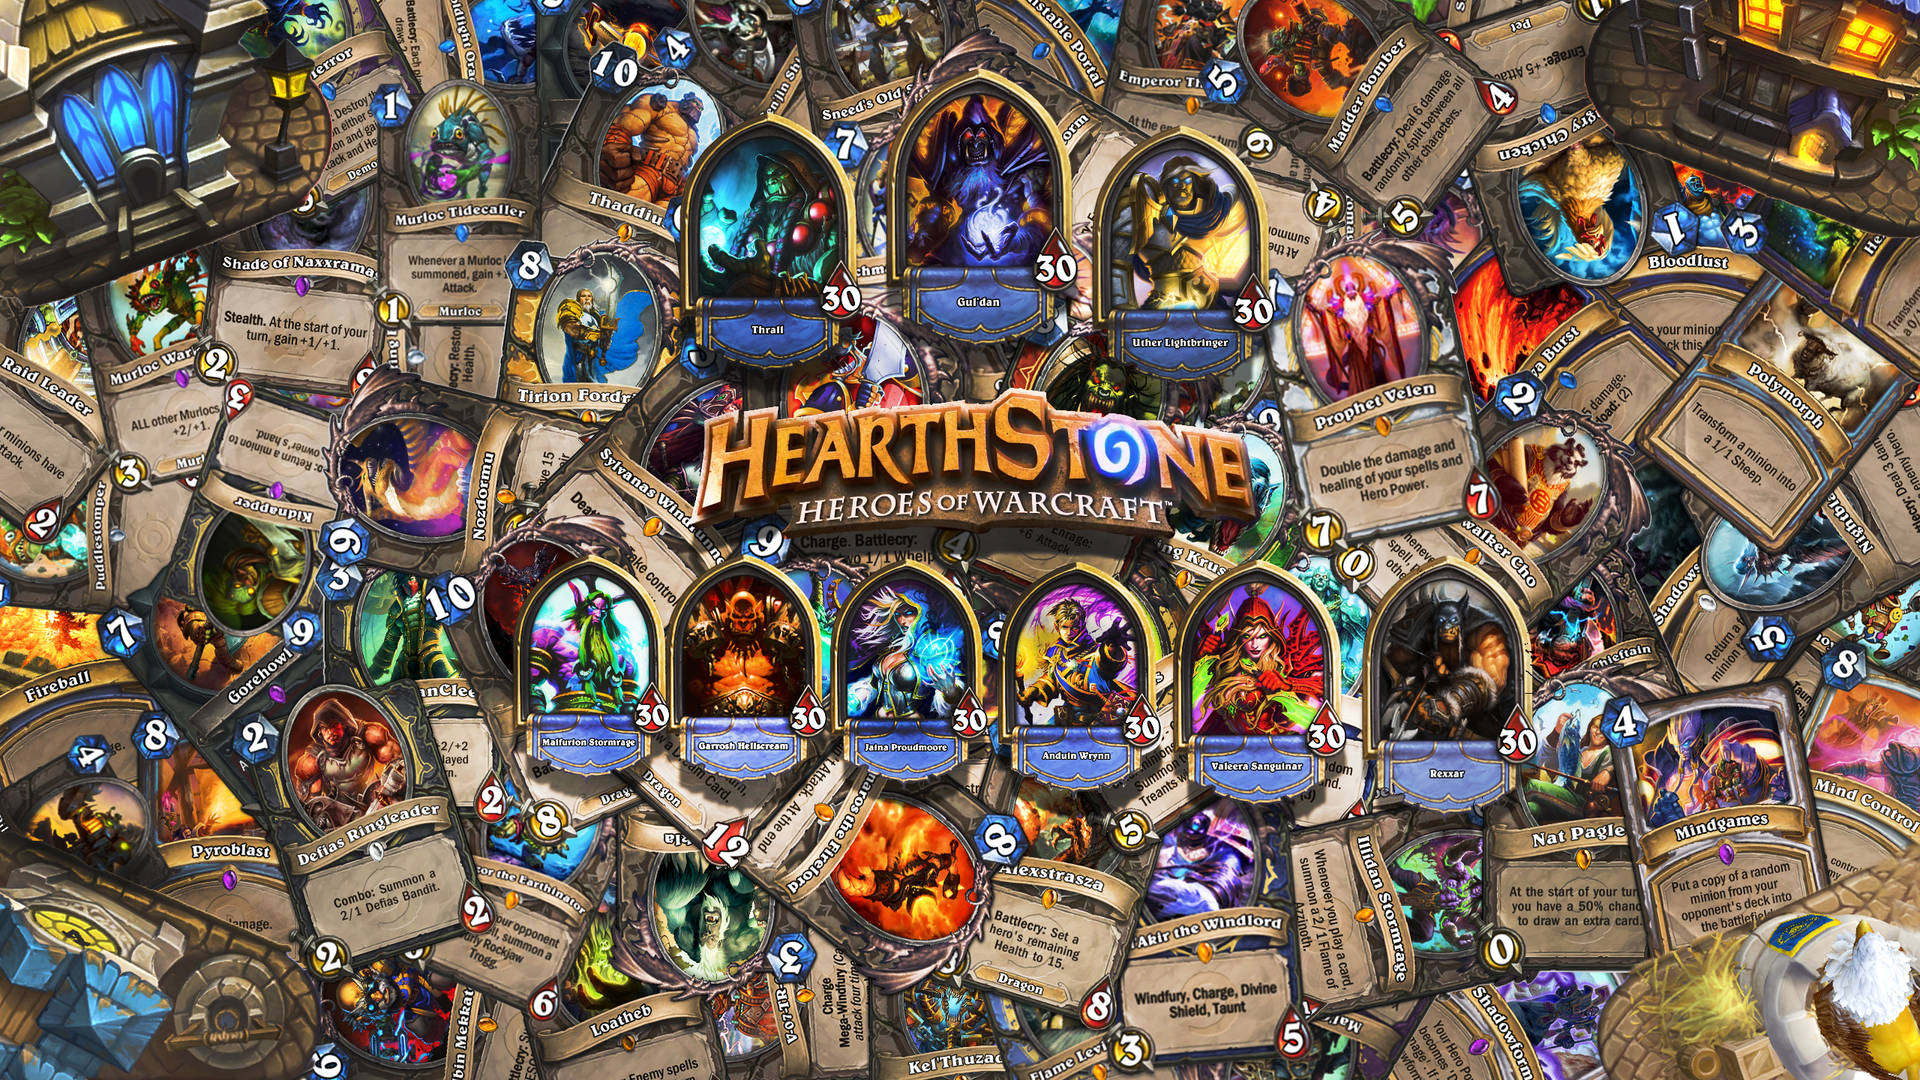 Epic Hearthstone Card Match Displayed At 2560 X 1440 Resolution